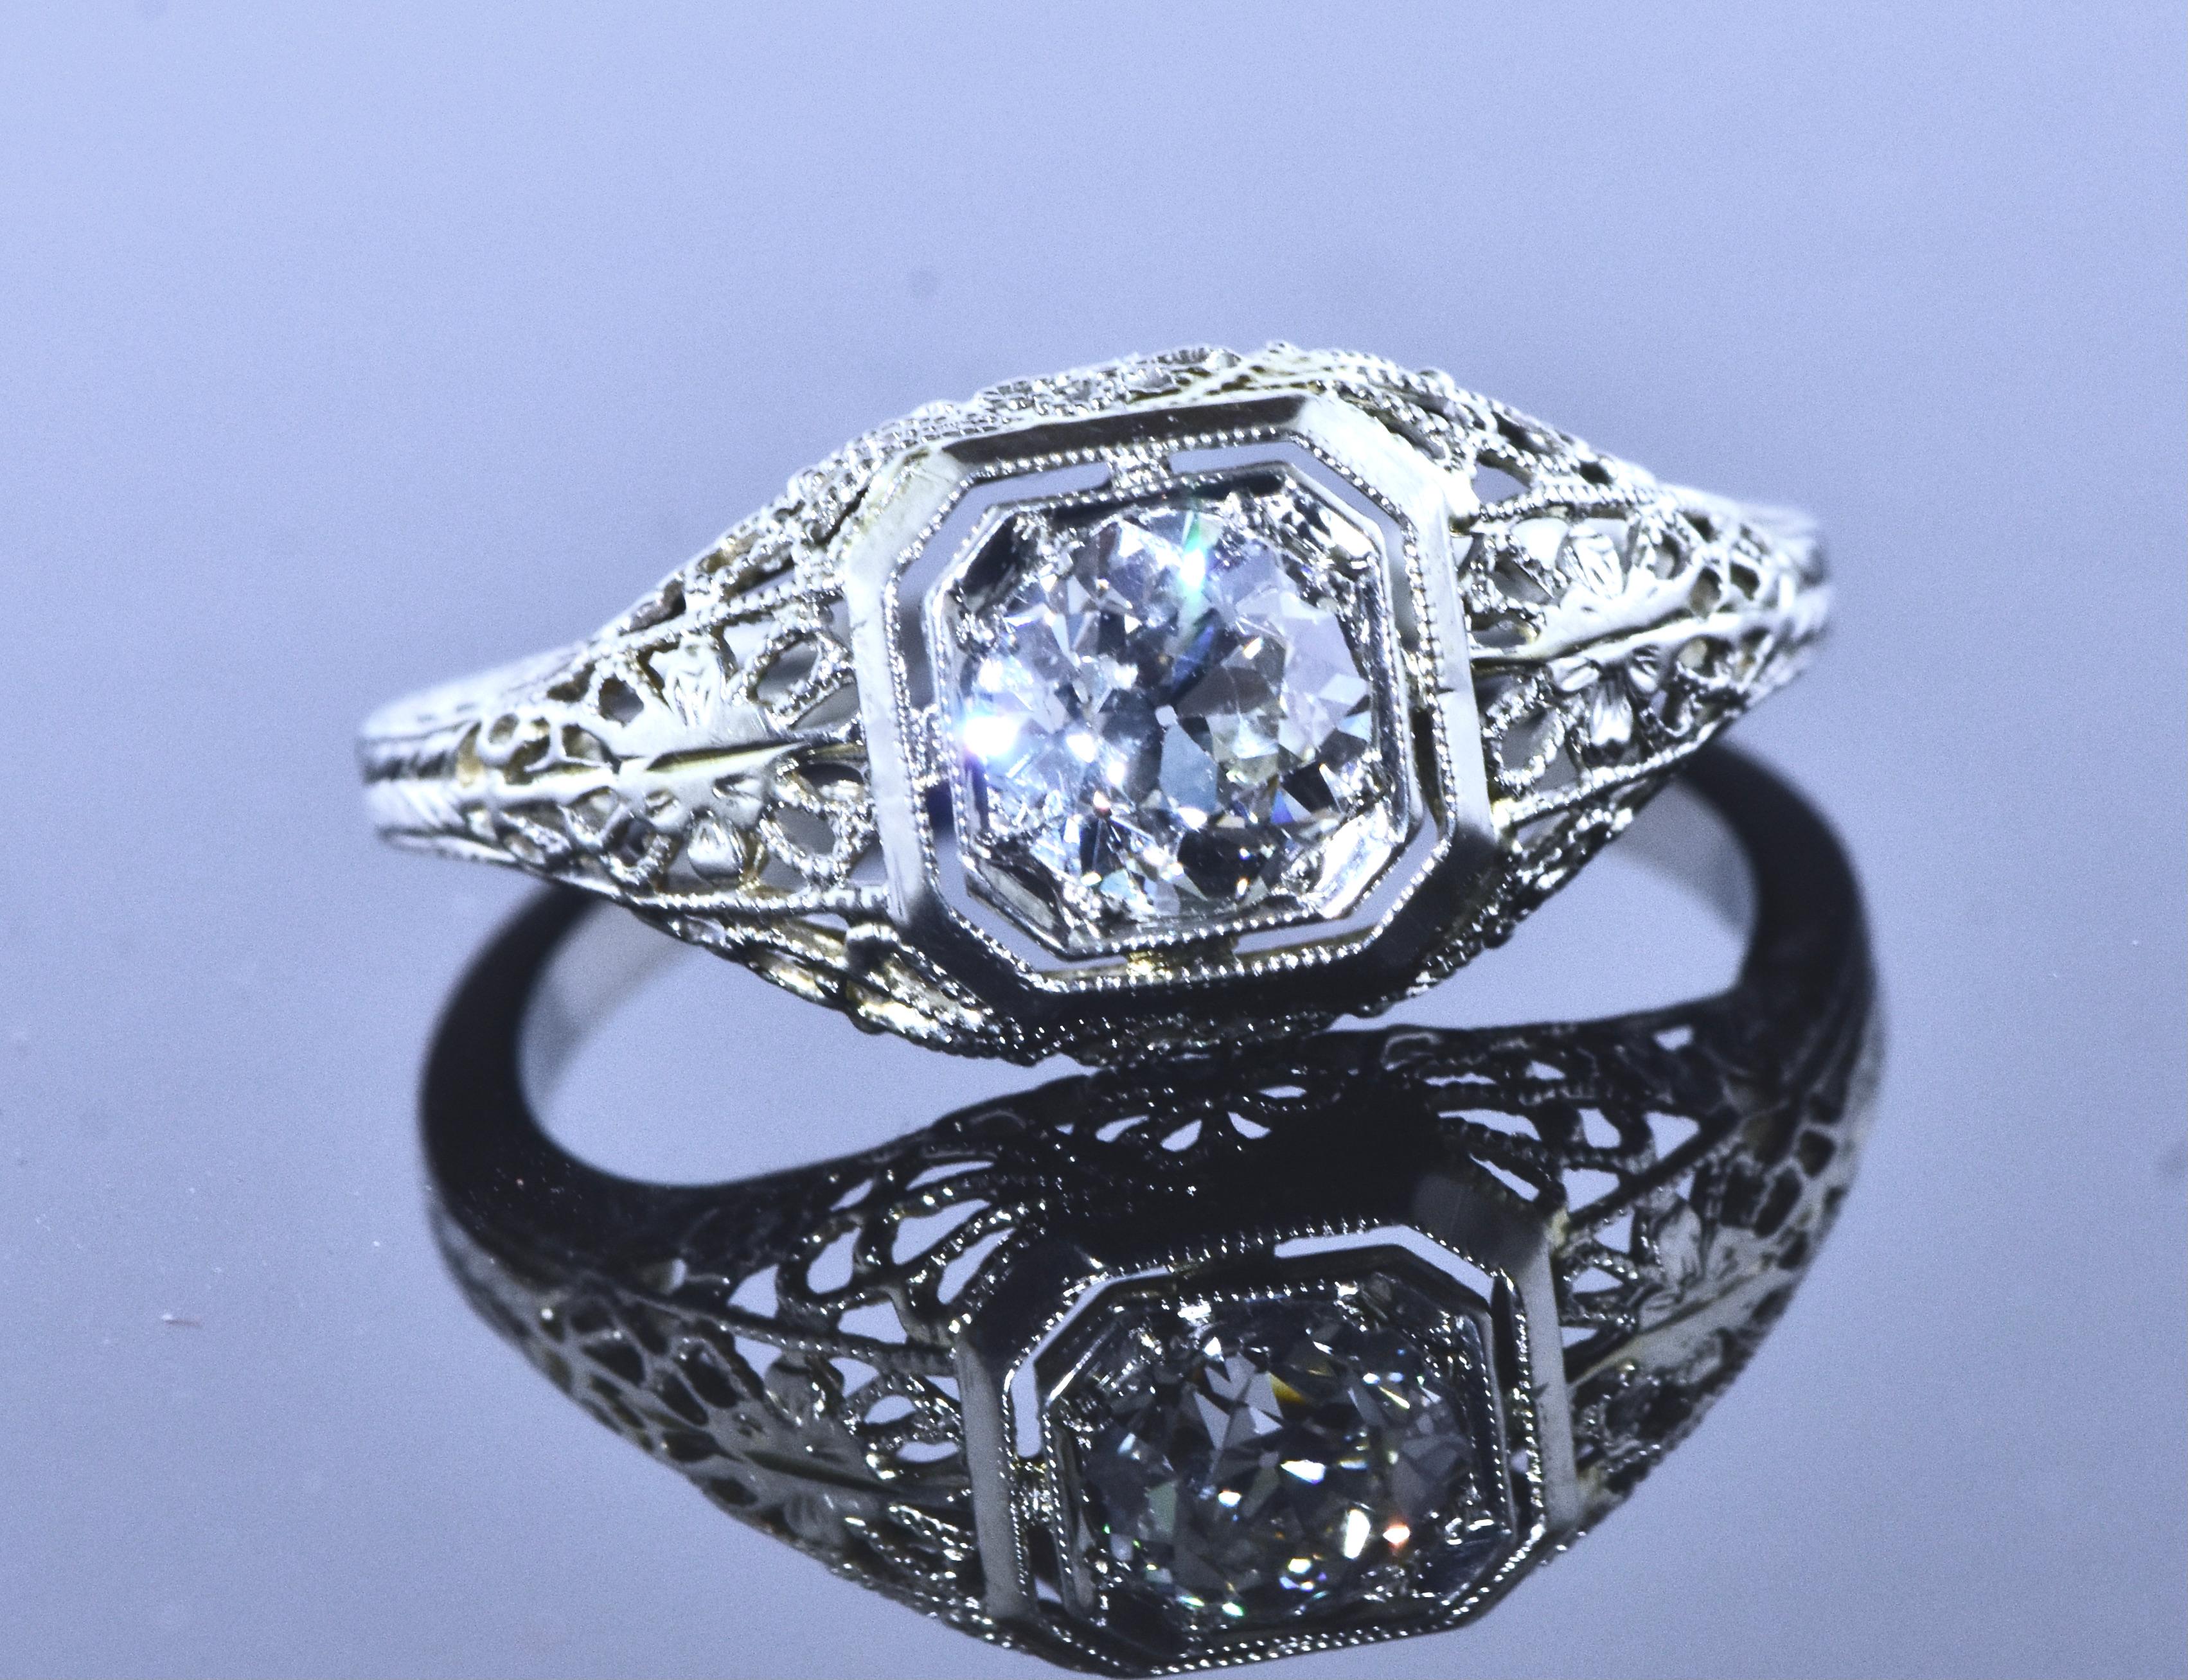 Antique Filigree Fine .65 Ct. Diamond and 18K White Gold Ring, American, c. 1920 For Sale 2